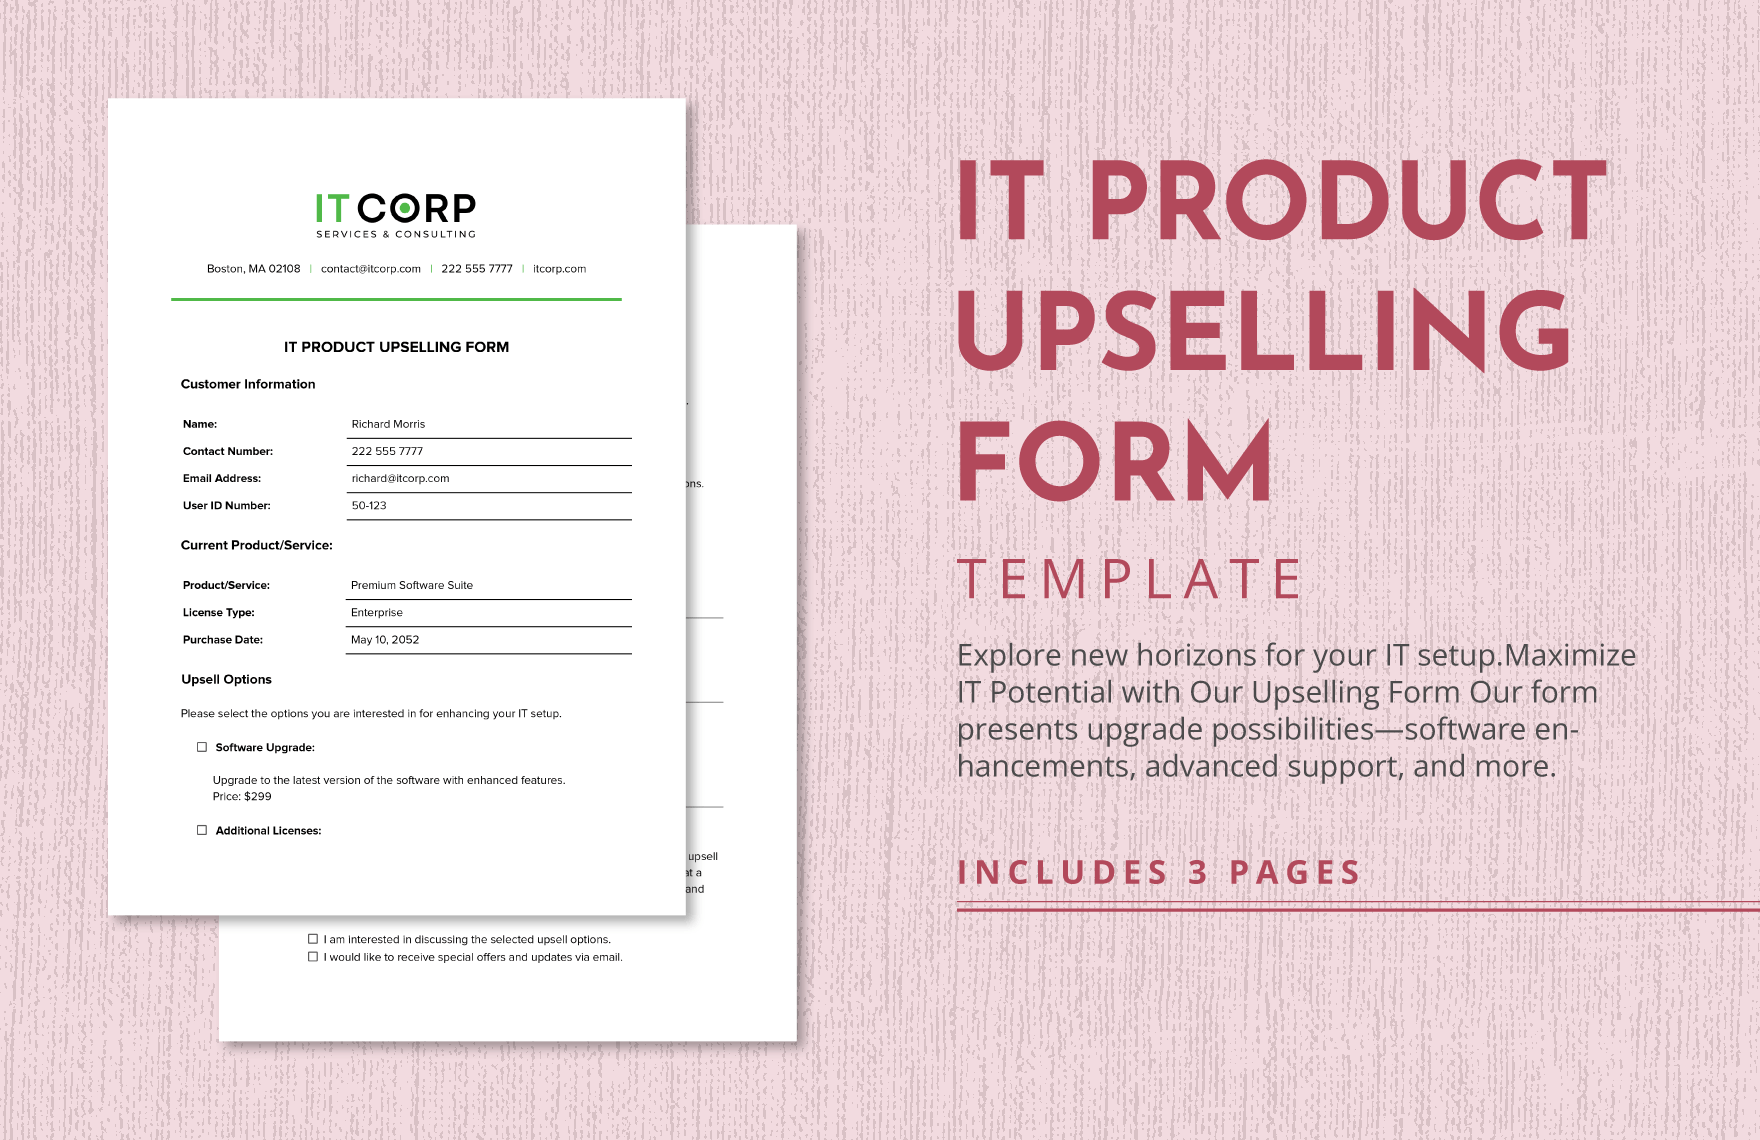 IT Product Upselling Form Template